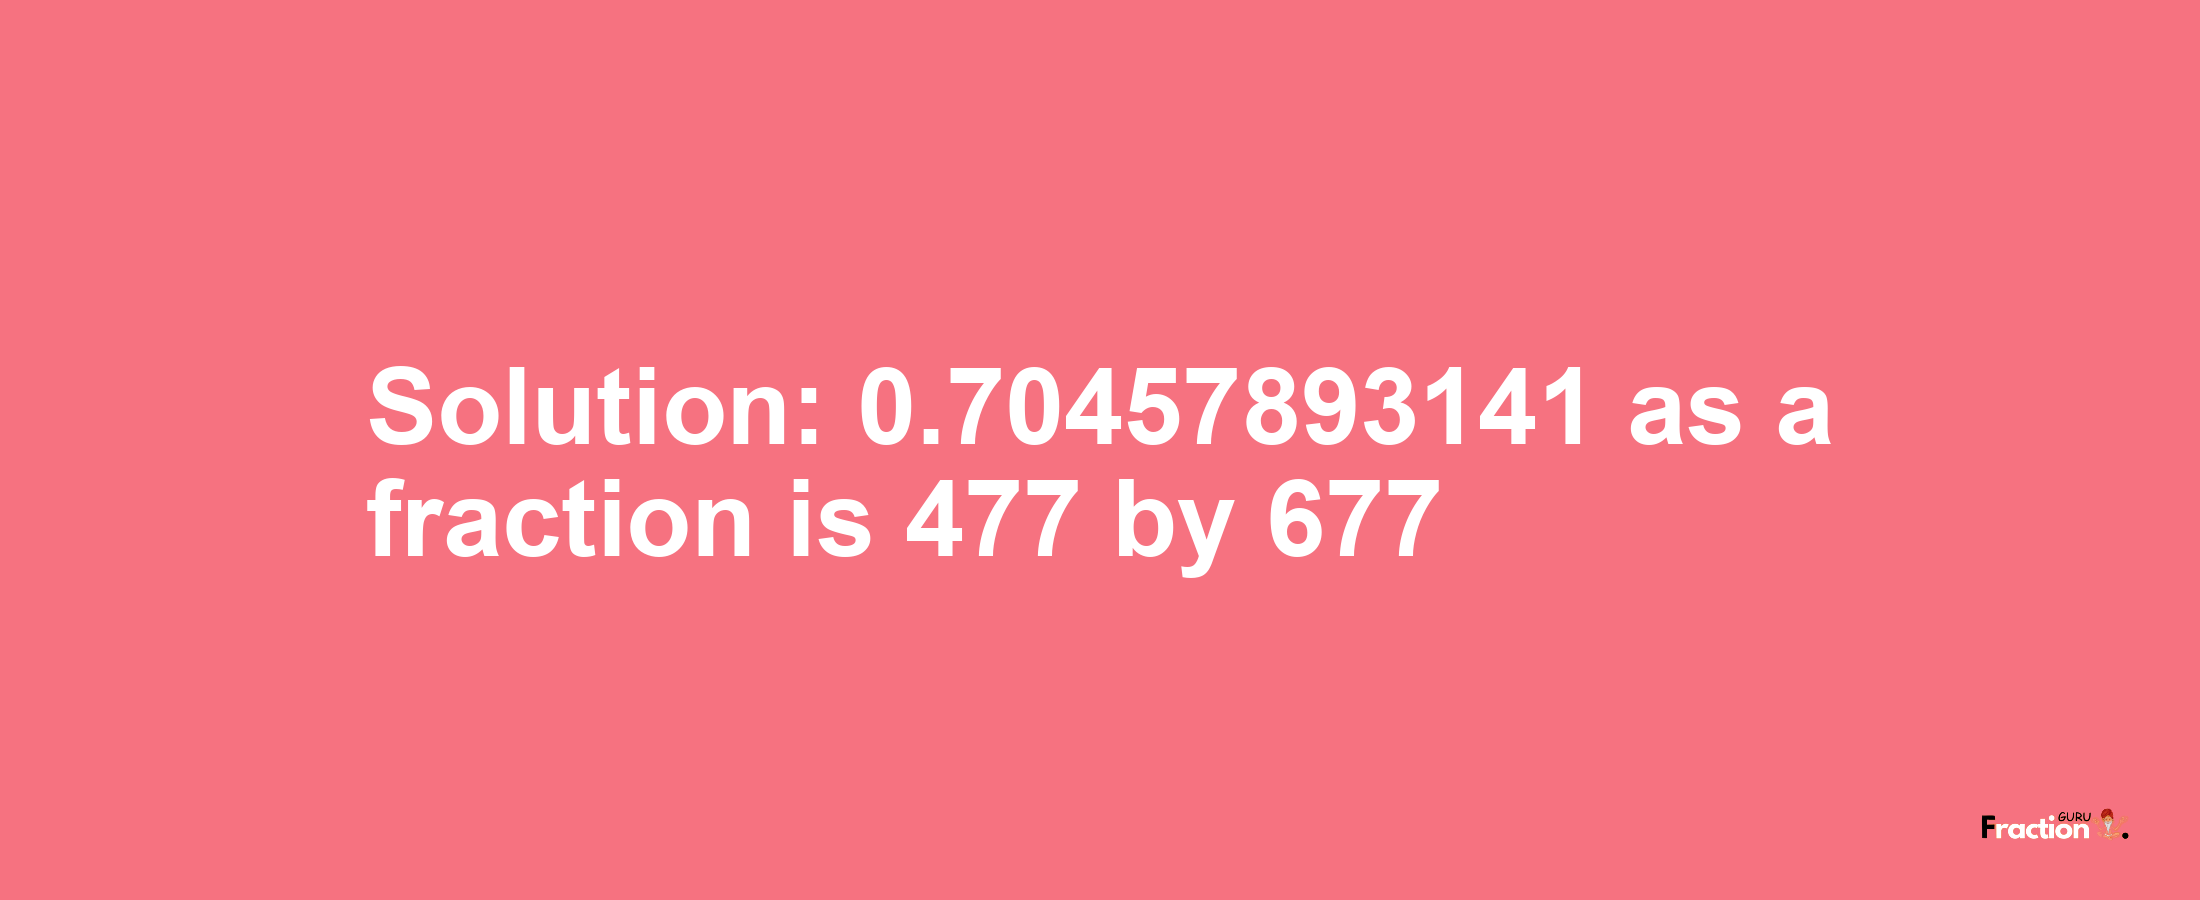 Solution:0.70457893141 as a fraction is 477/677